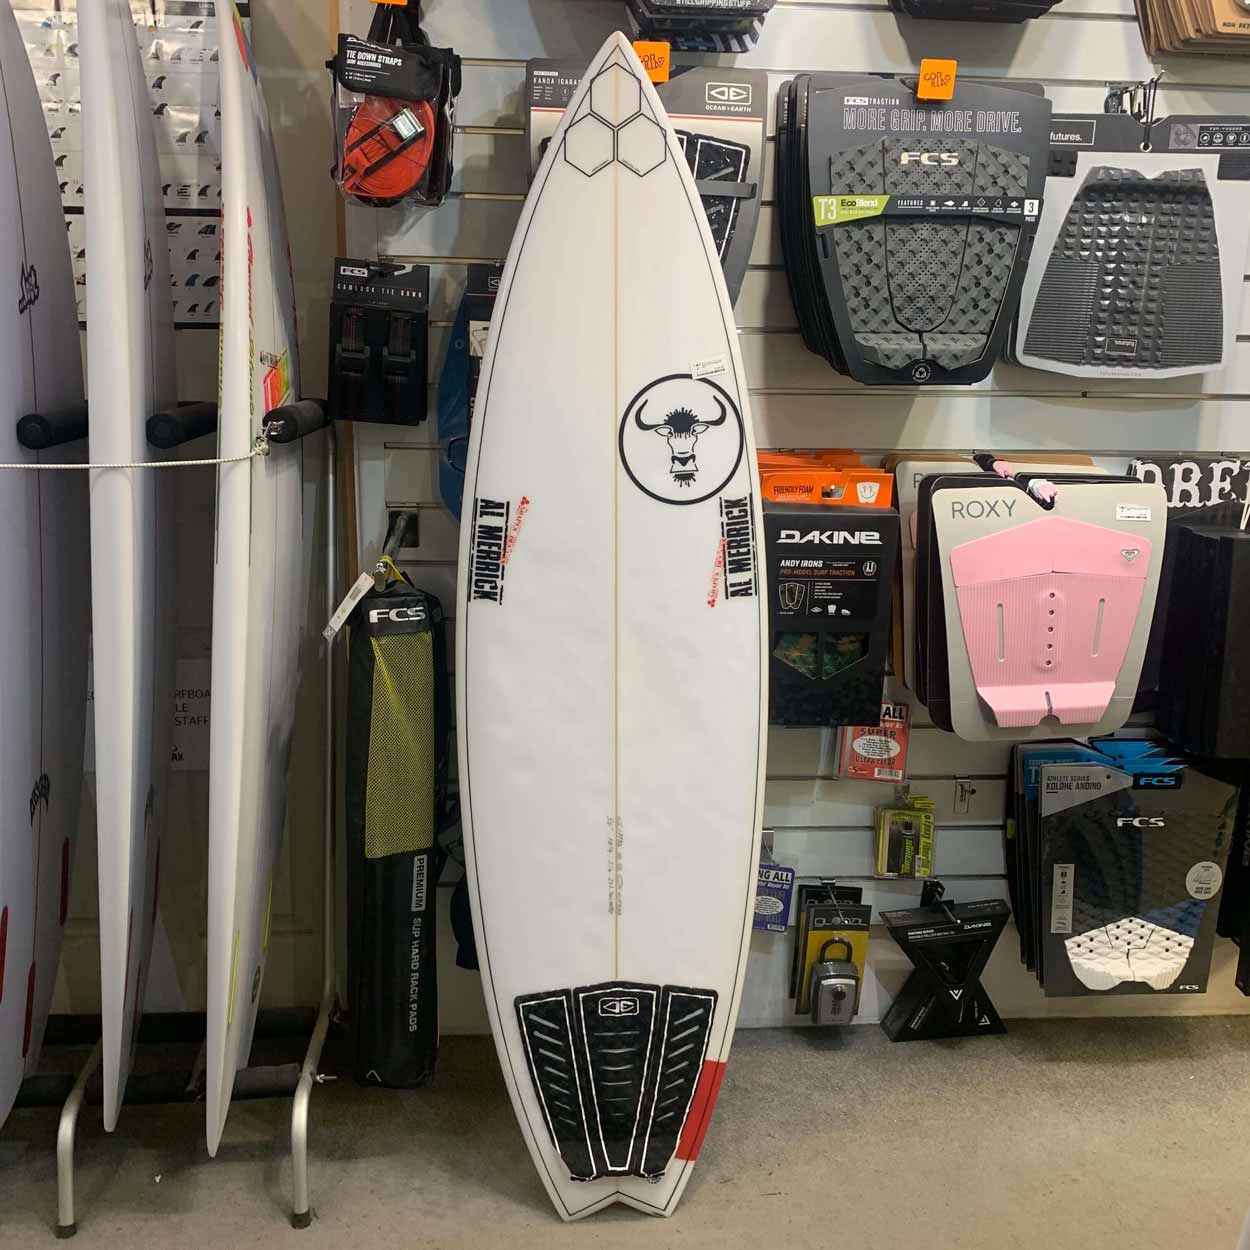 Channel Islands 5'8 Too Happy Second Hand Shortboard 24L - White - Second Hand Shortboard by Channel Islands 5ft 8 x 18 1/4 x 2 1/4